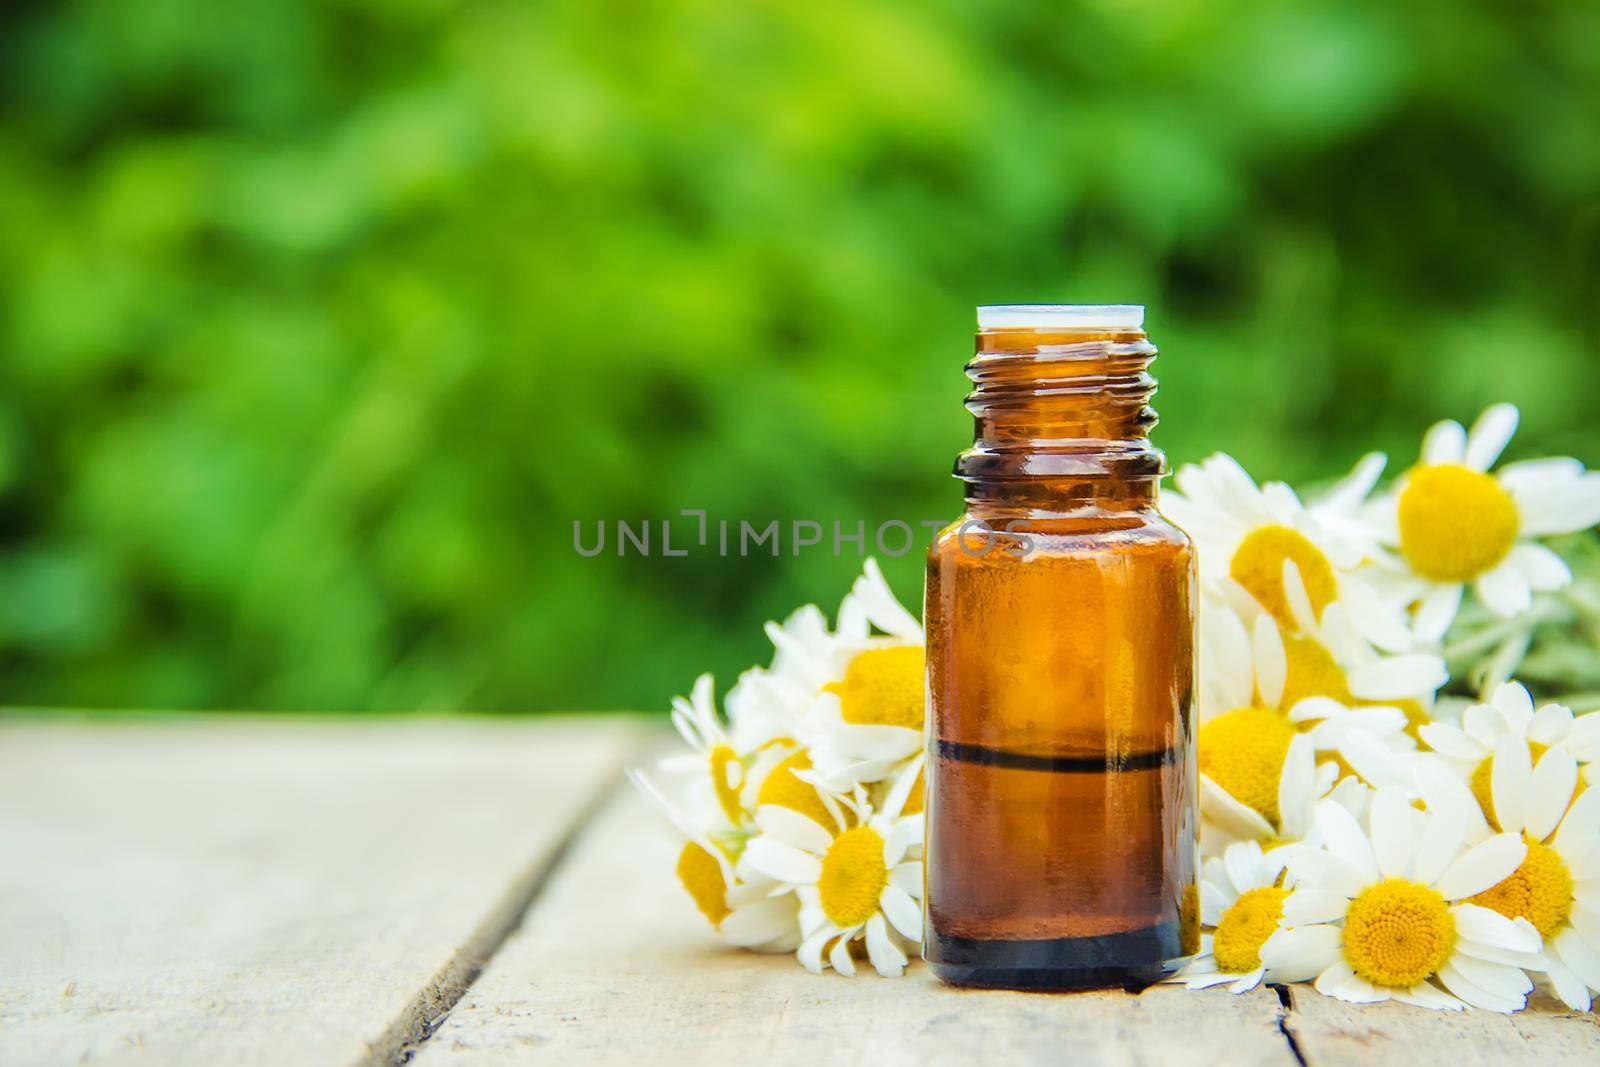 Chamomile extract in a small bottle. Selective focus.